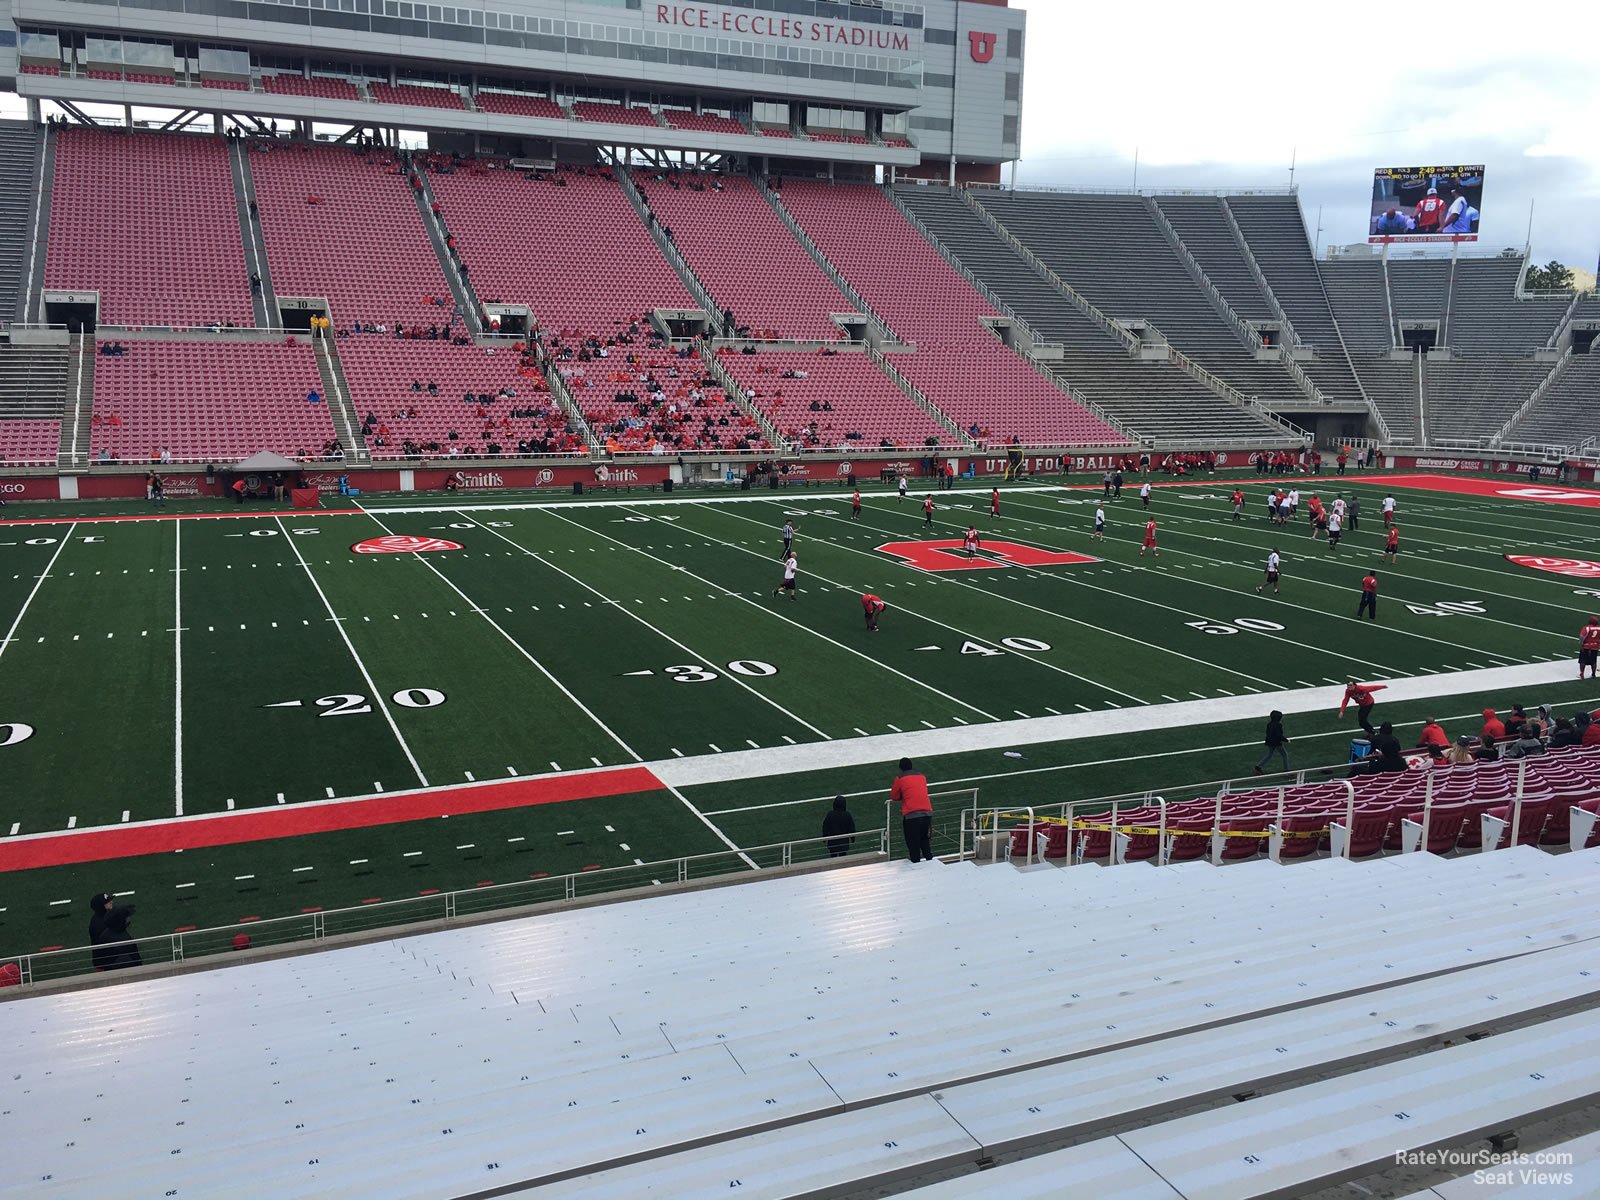 section e38, row 20 seat view  - rice-eccles stadium